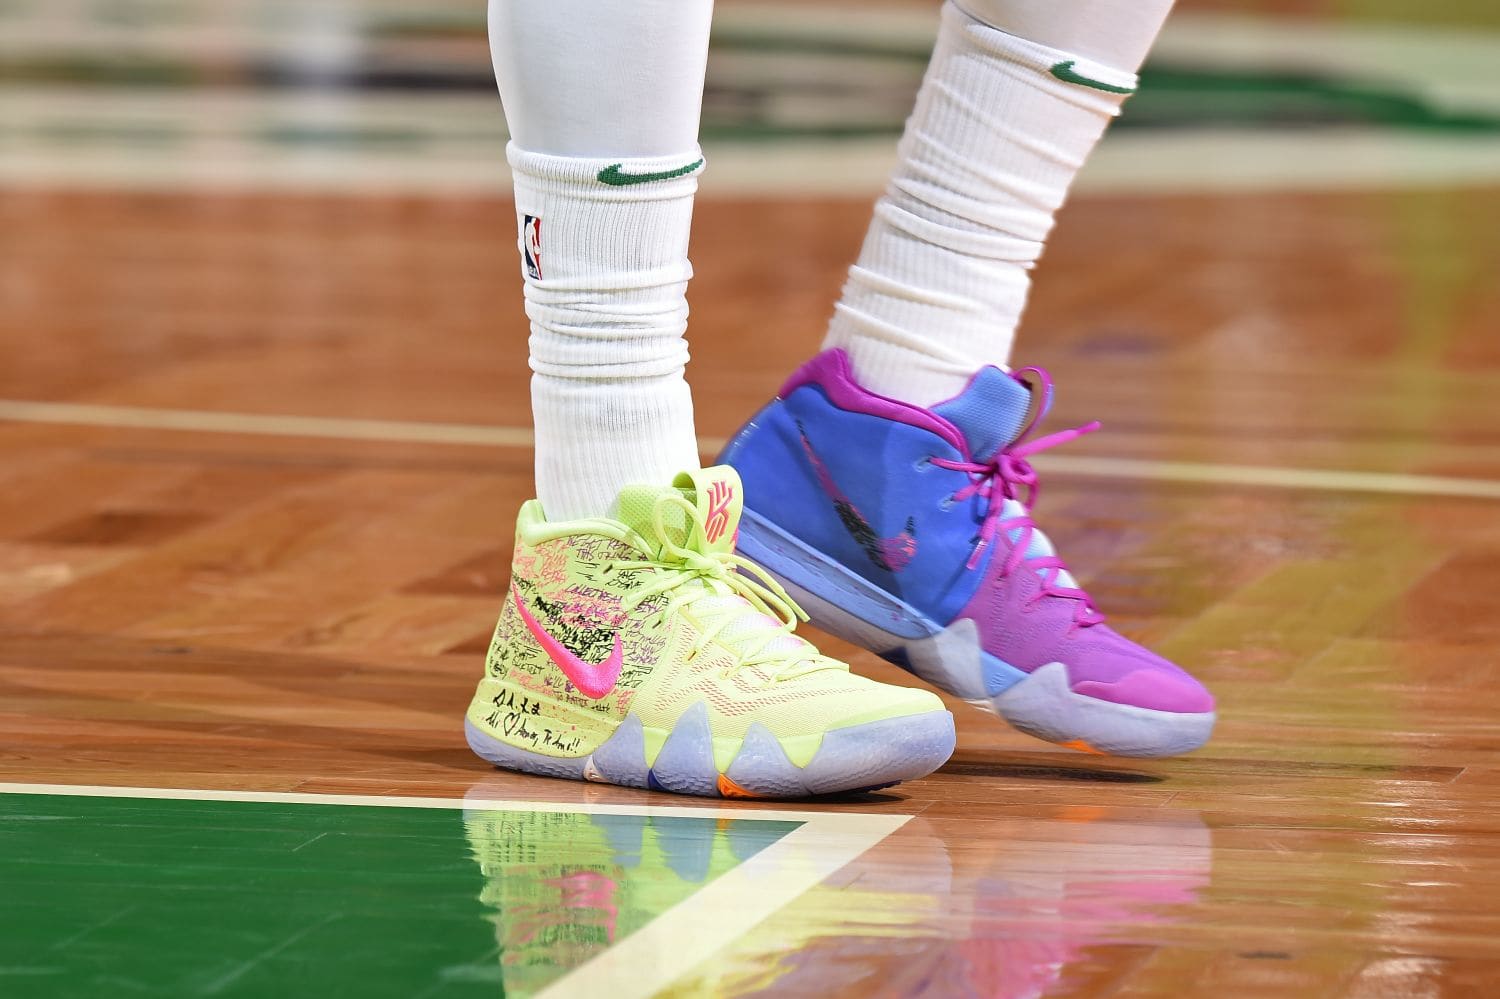 NBA -- Which player had the best sneakers in Week 9? - ESPN